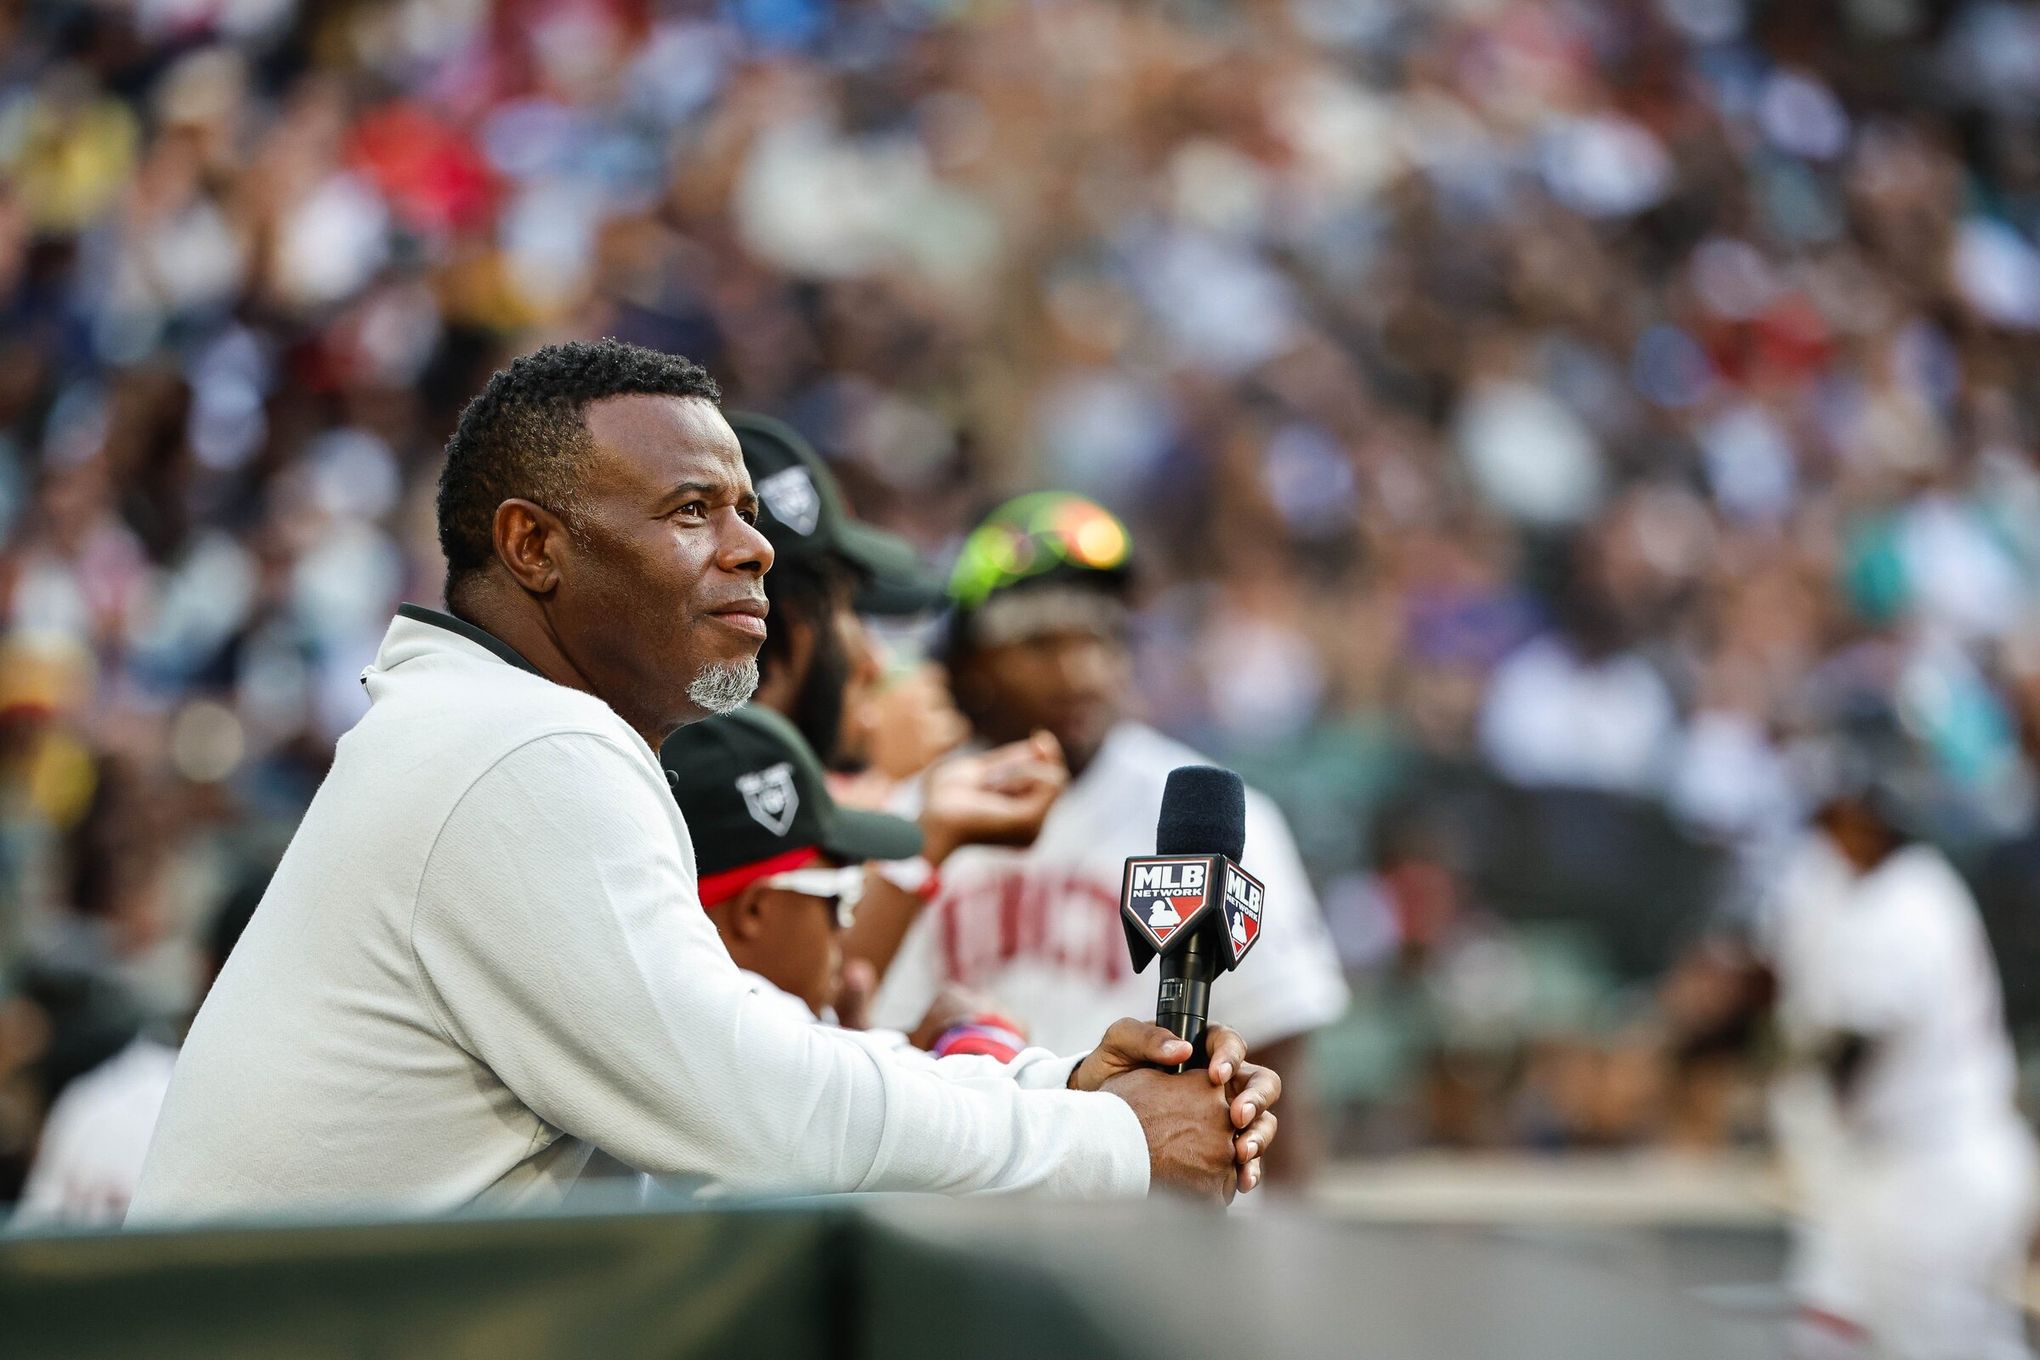 At the HBCU Swingman Classic, pro baseball confronts its decline in Black  players